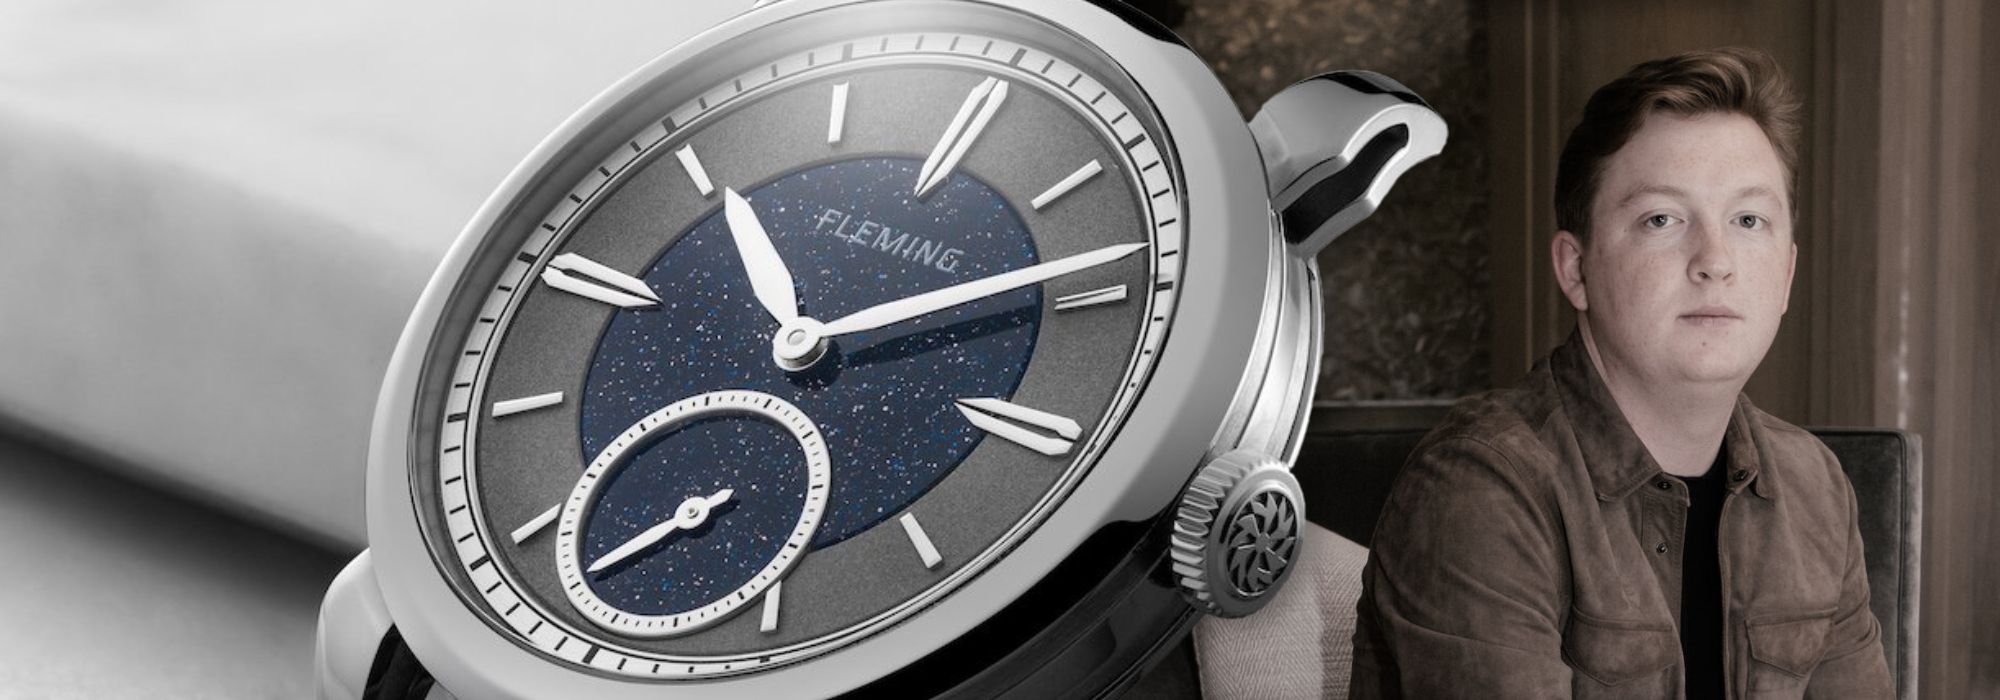 Fleming Watches: Entering The Watch Scene With A Not So Entry-Level Watch